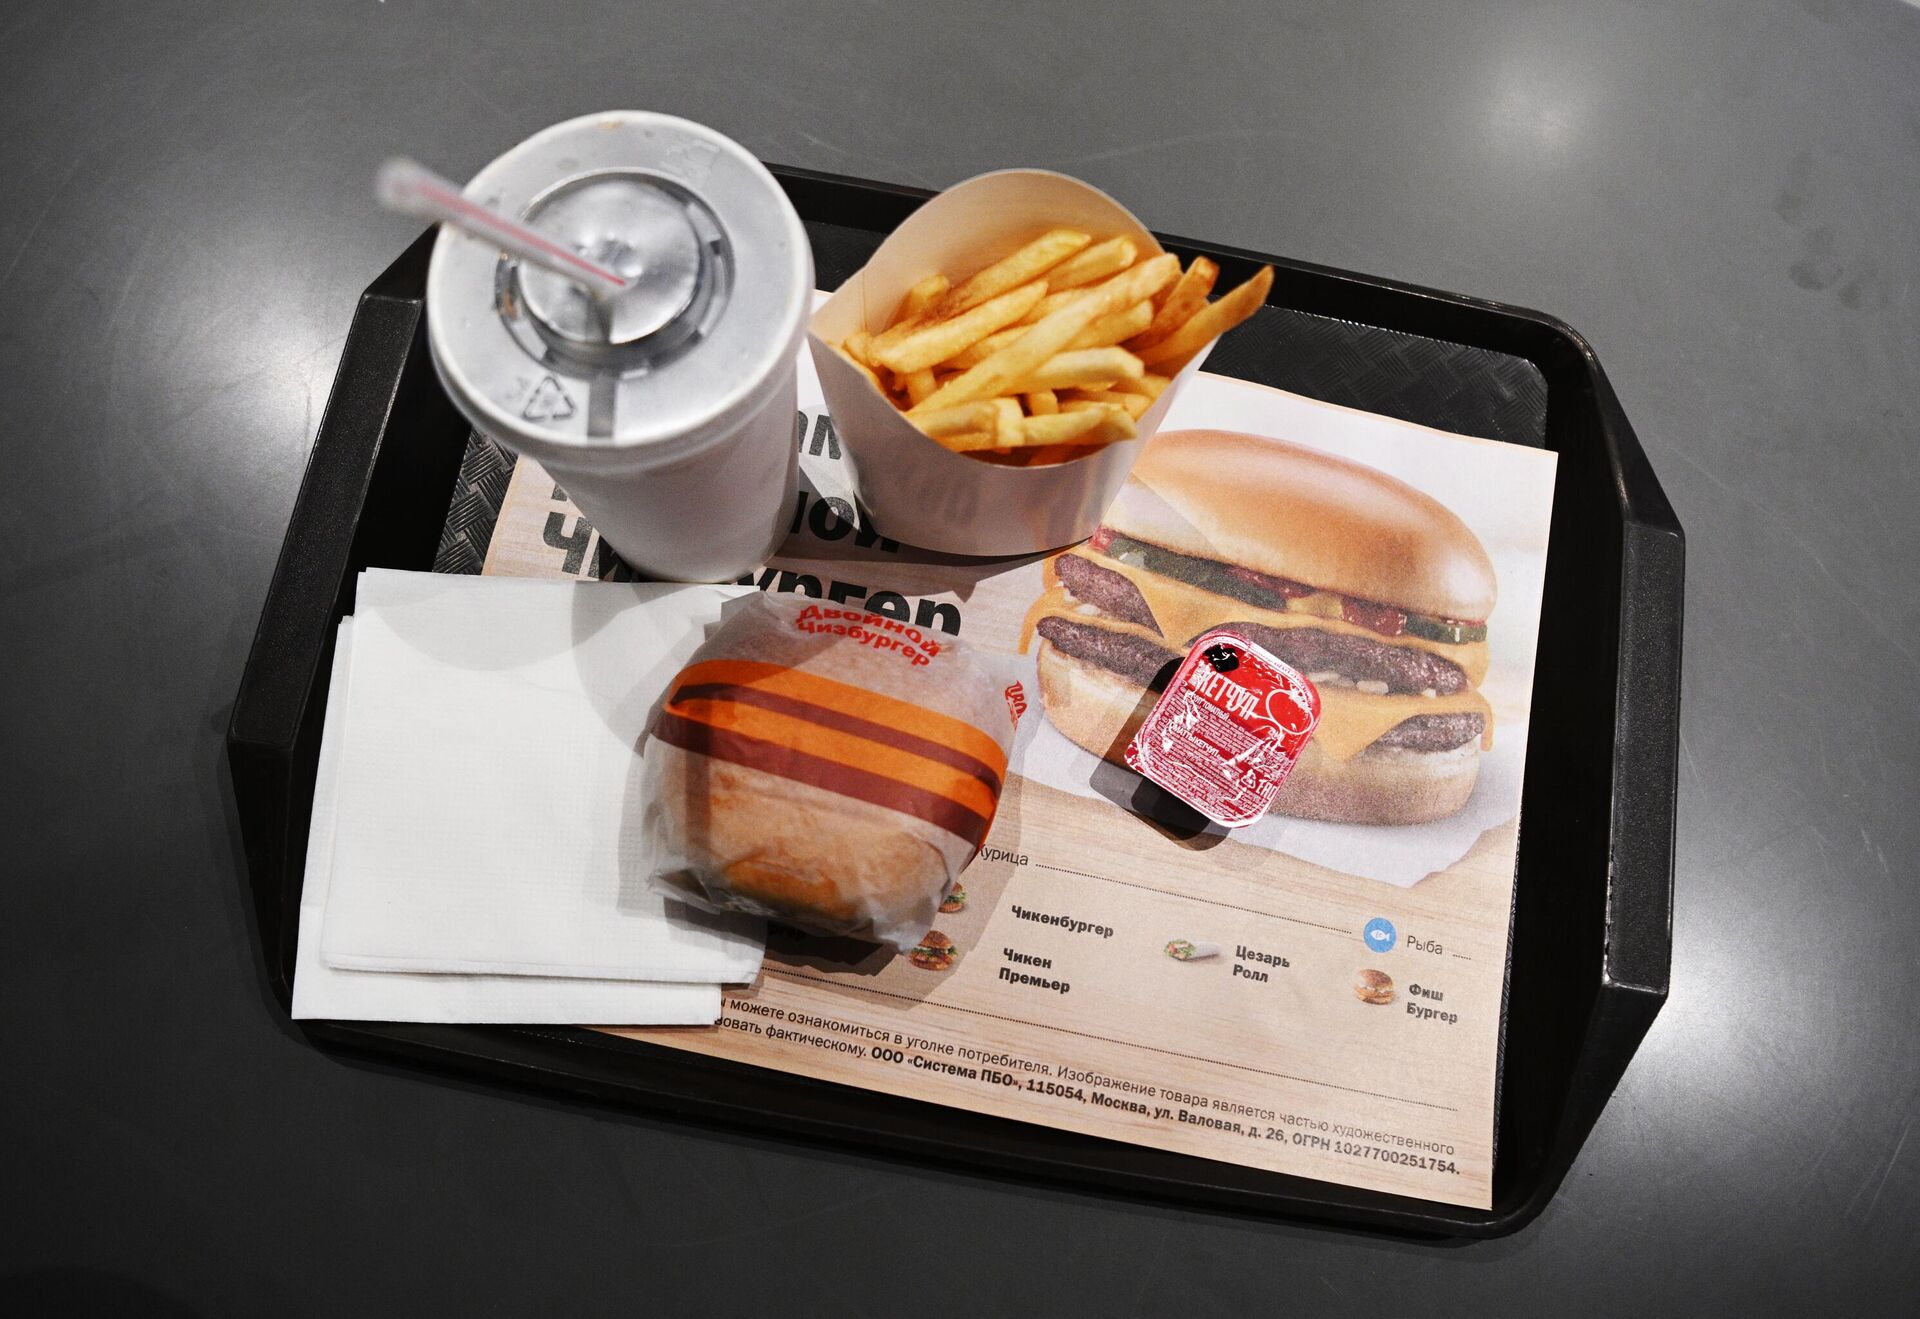 A ready order is seen at a joint of the newly opened fast food restaurant chain on Bolshaya Bronnaya Street in Moscow, Russia. The new chain of restaurants based on McDonald's is going to be called Vkusno i tochka (Delicious and that's it!). - Sputnik International, 1920, 03.03.2023